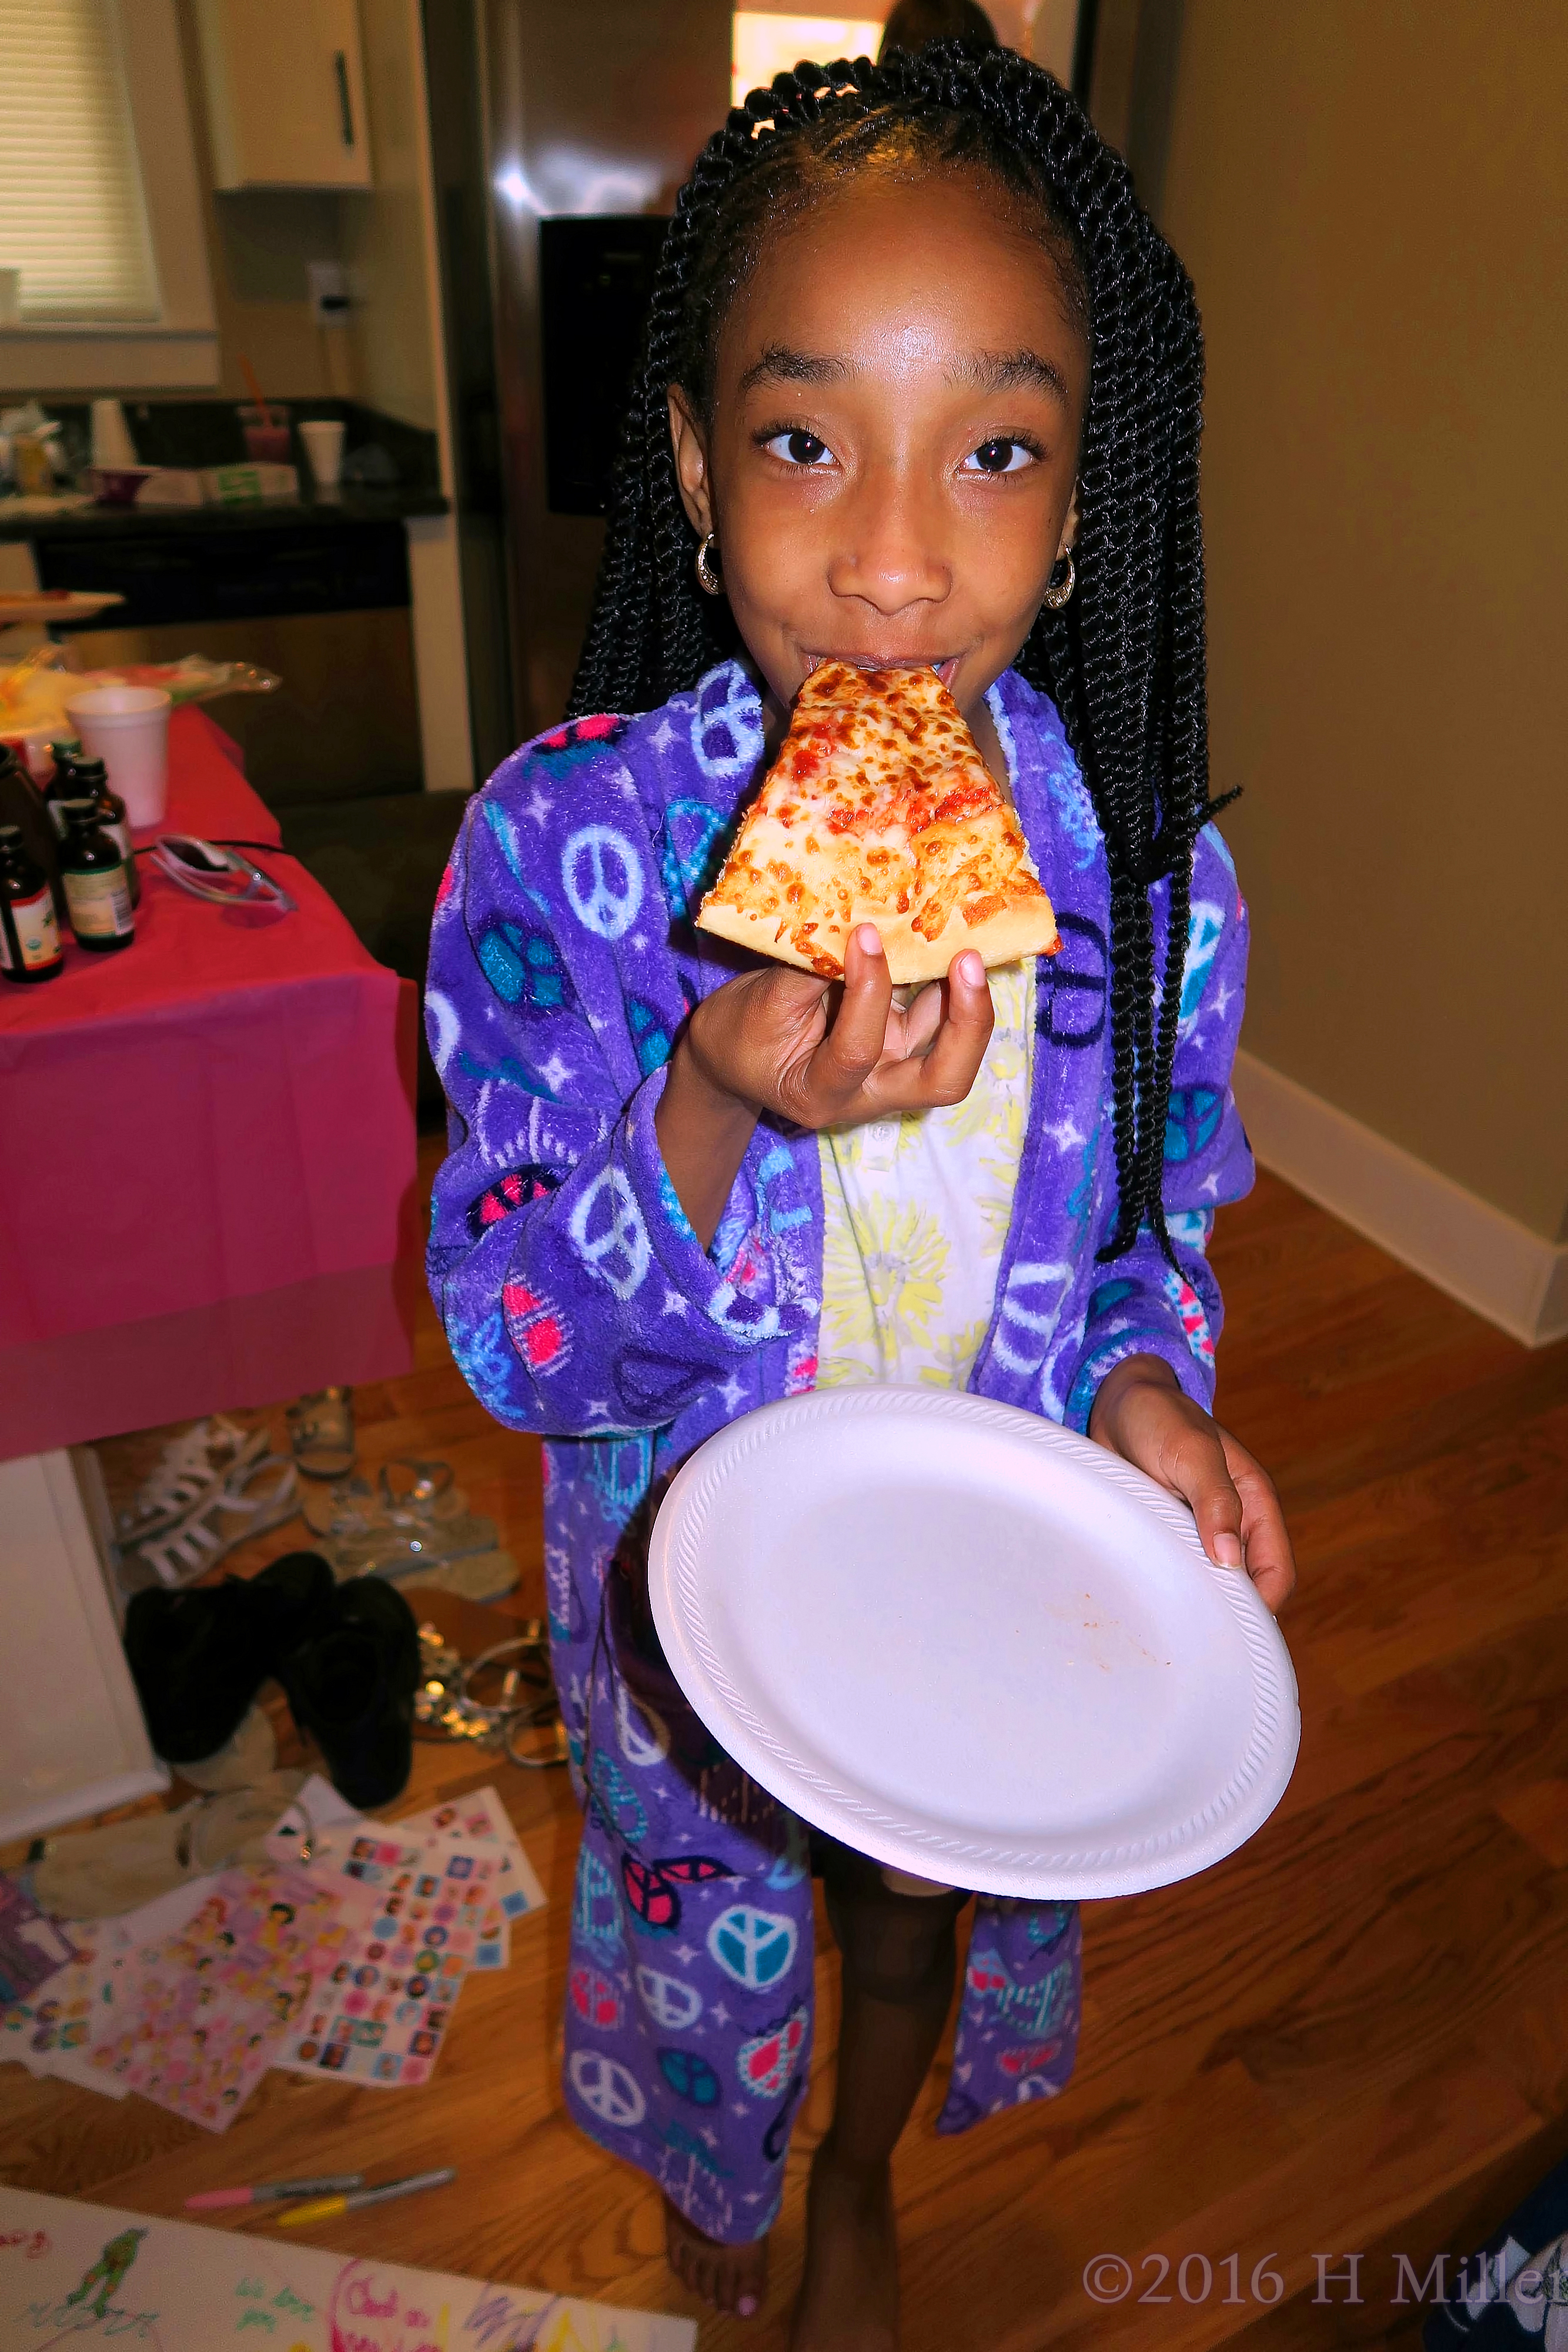 Eating Her Pizza!